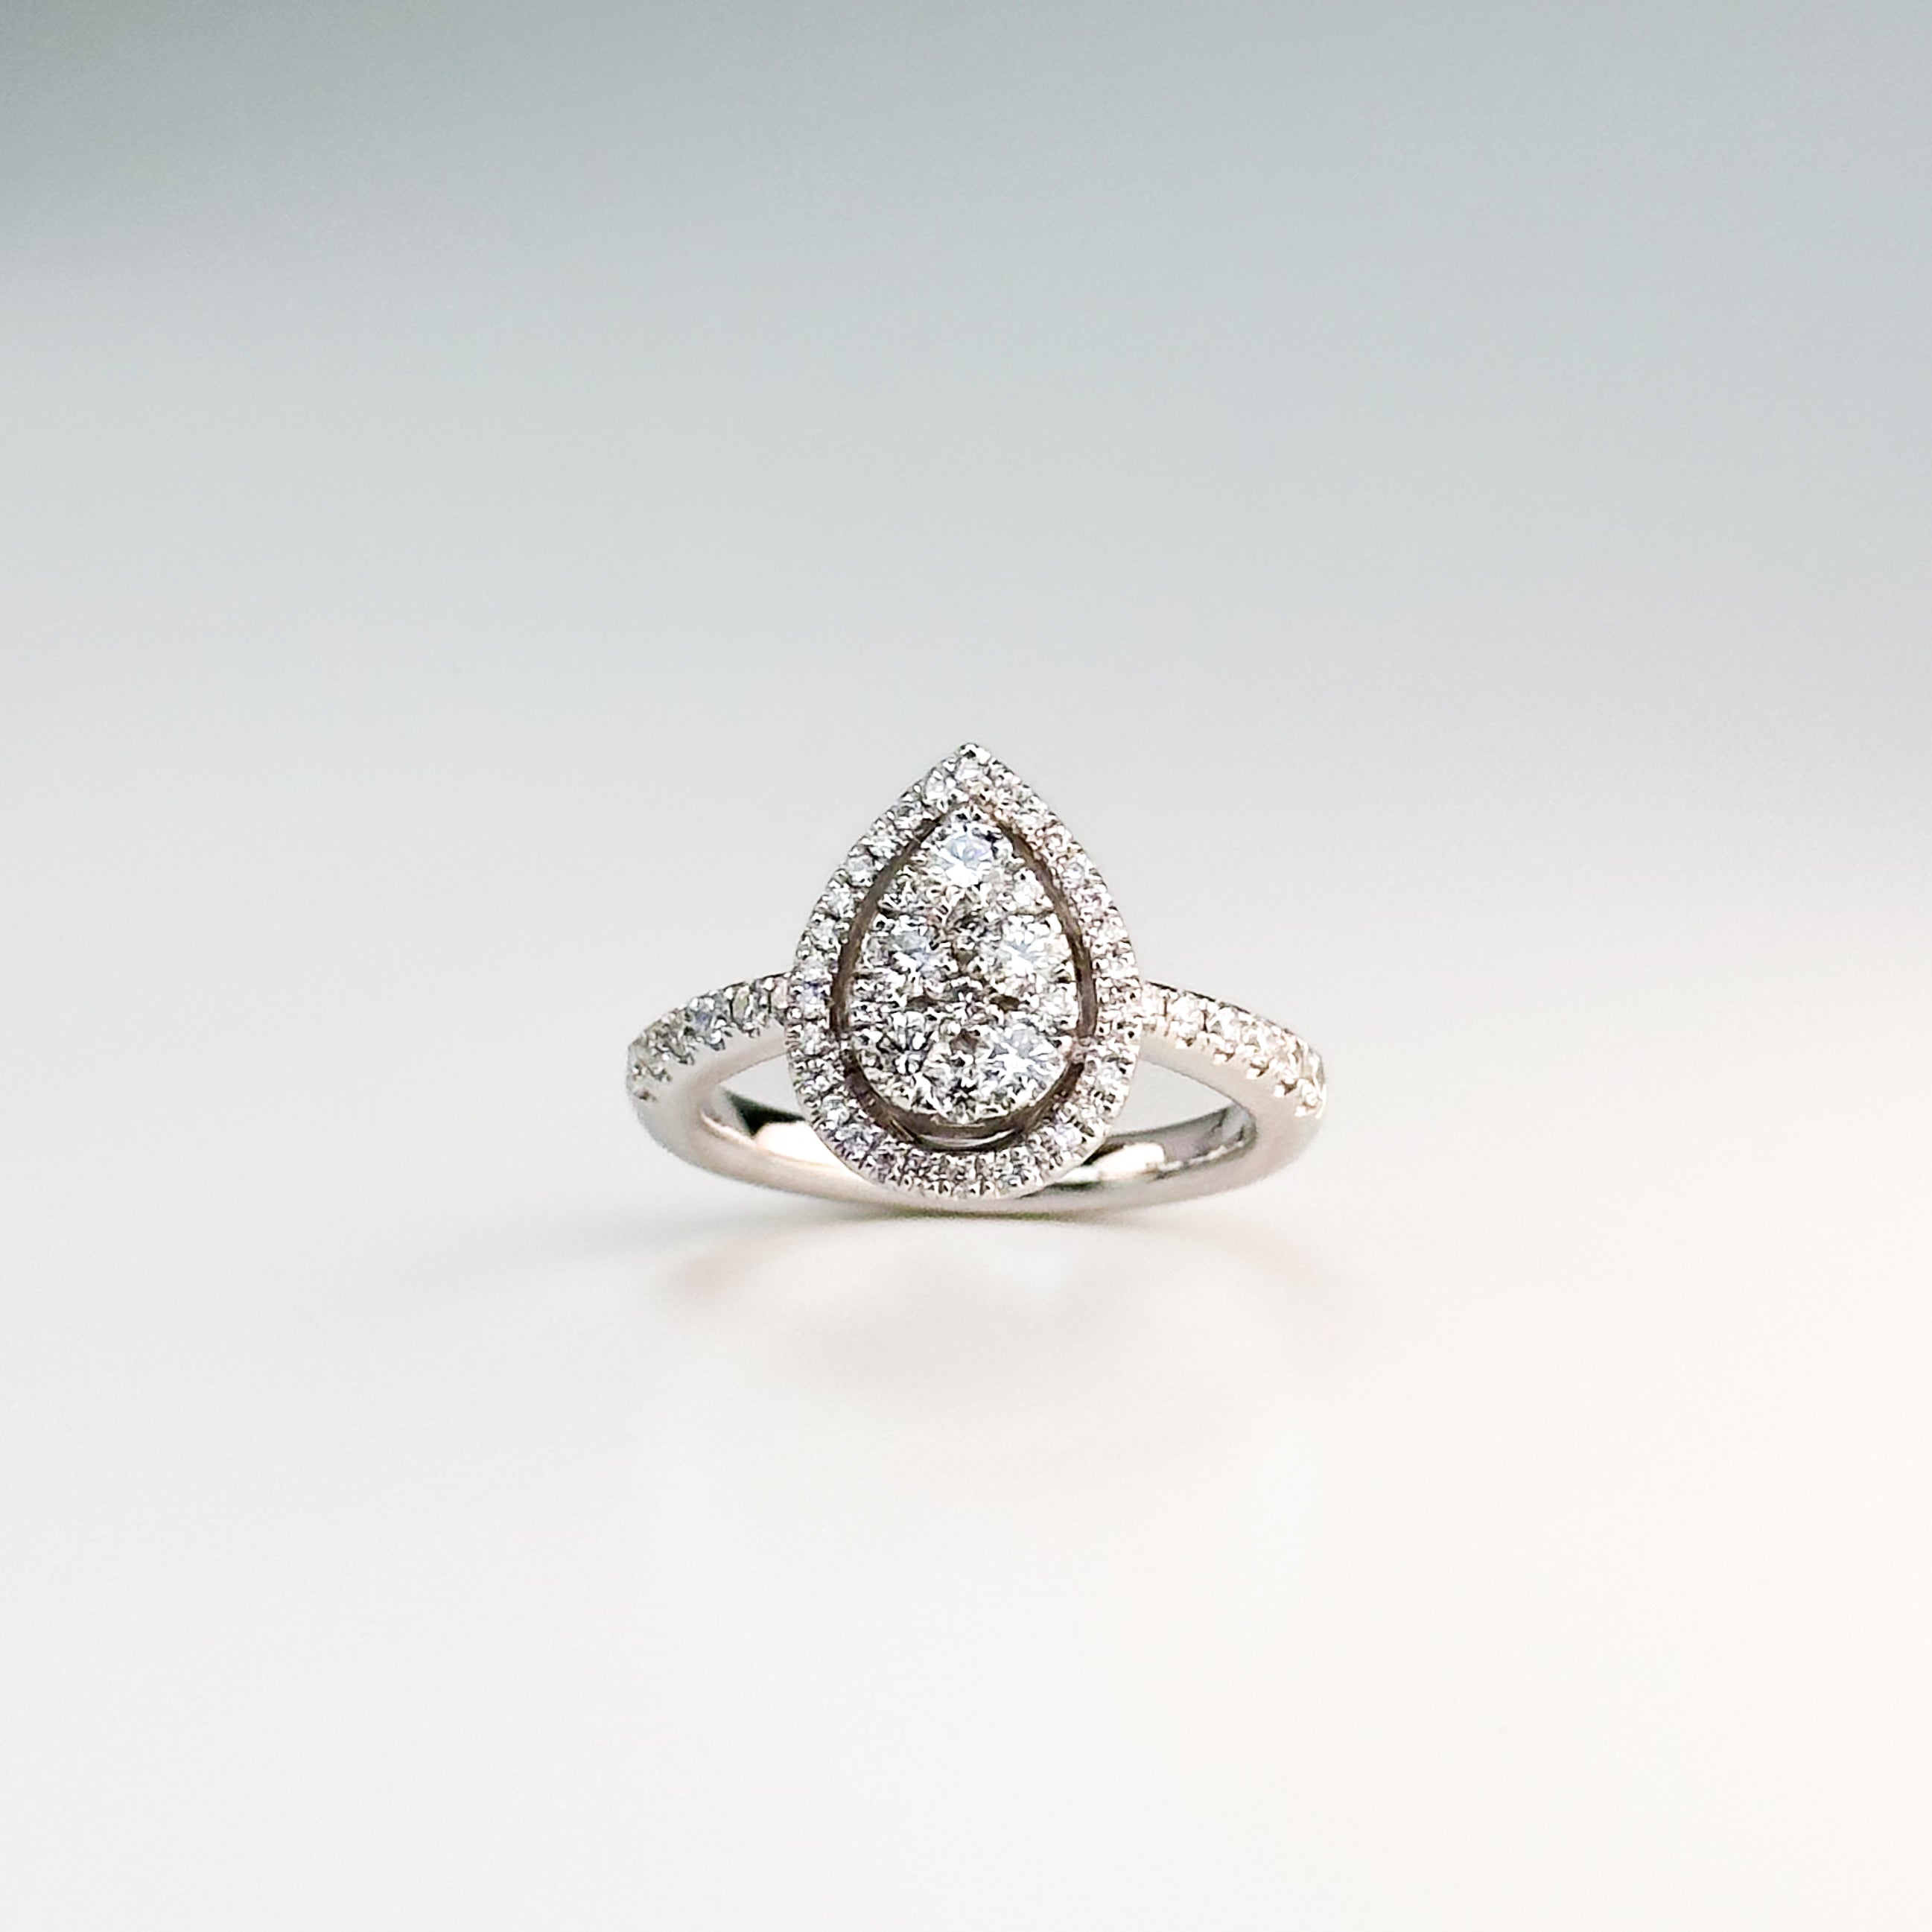 0.80ct Pear shape Diamond Cluster Ring with Halo